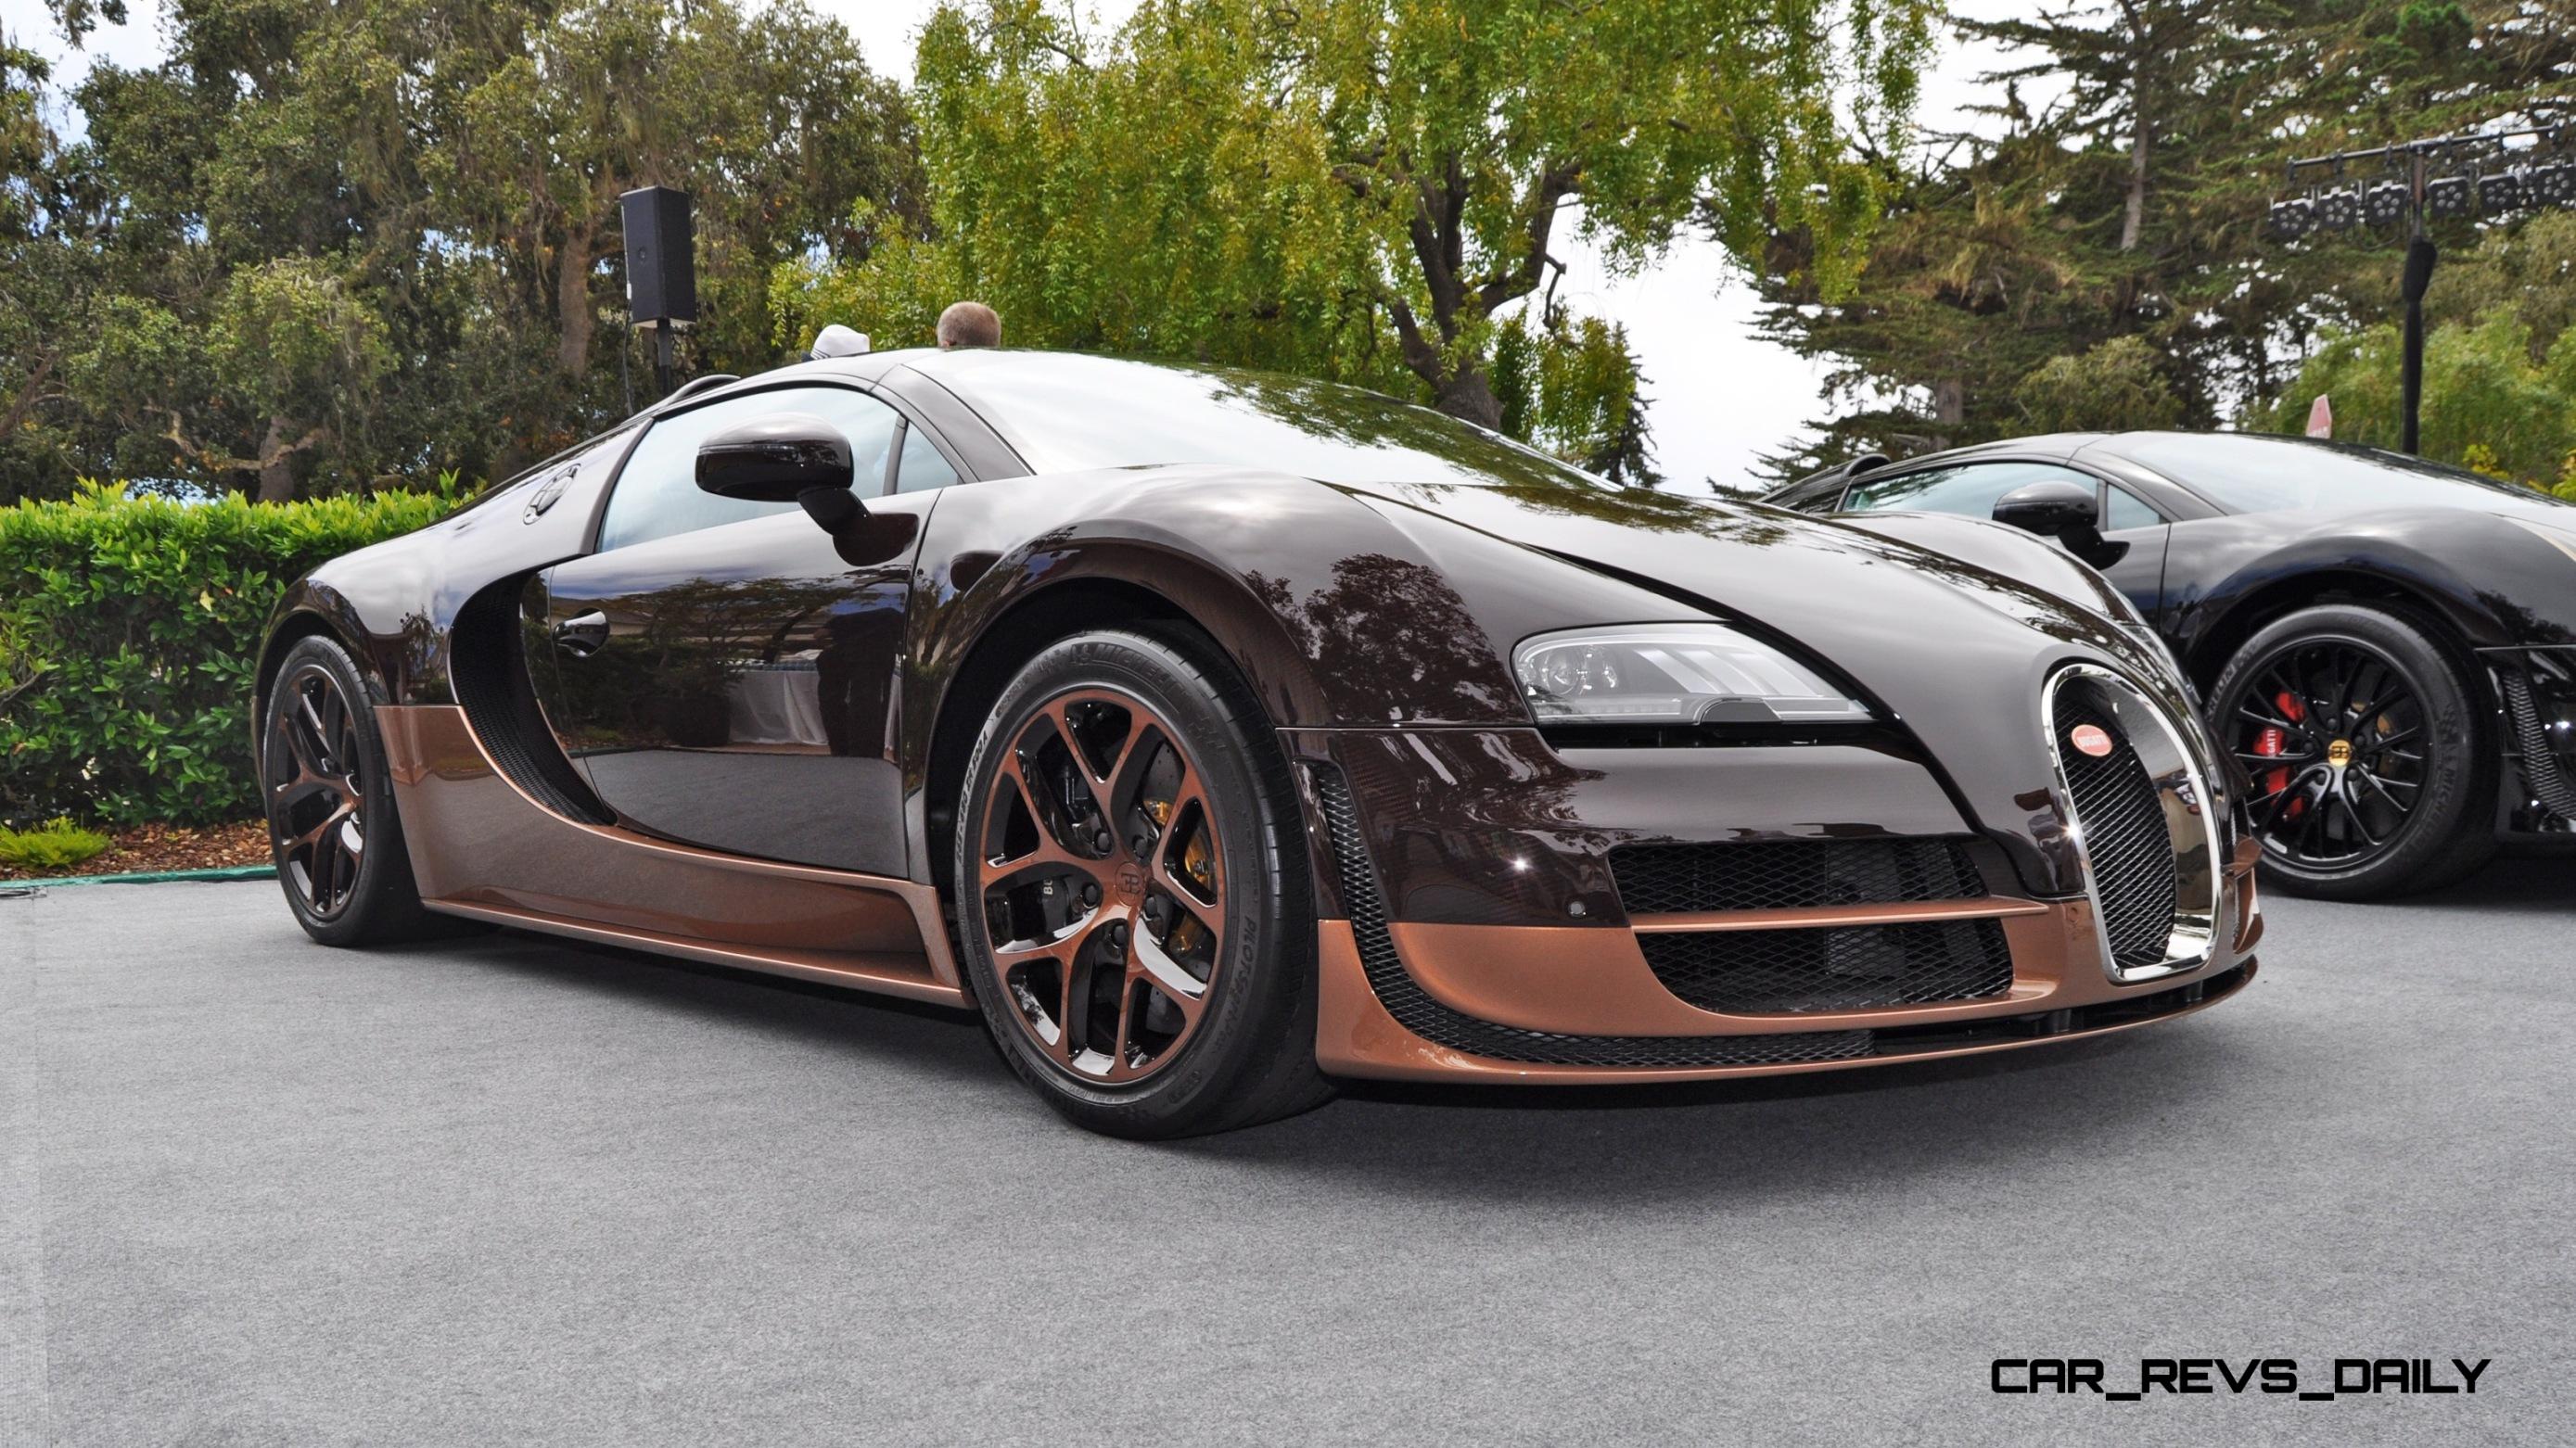 All Six Bugatti Veyron Legends Together In Pebble Beach 2014